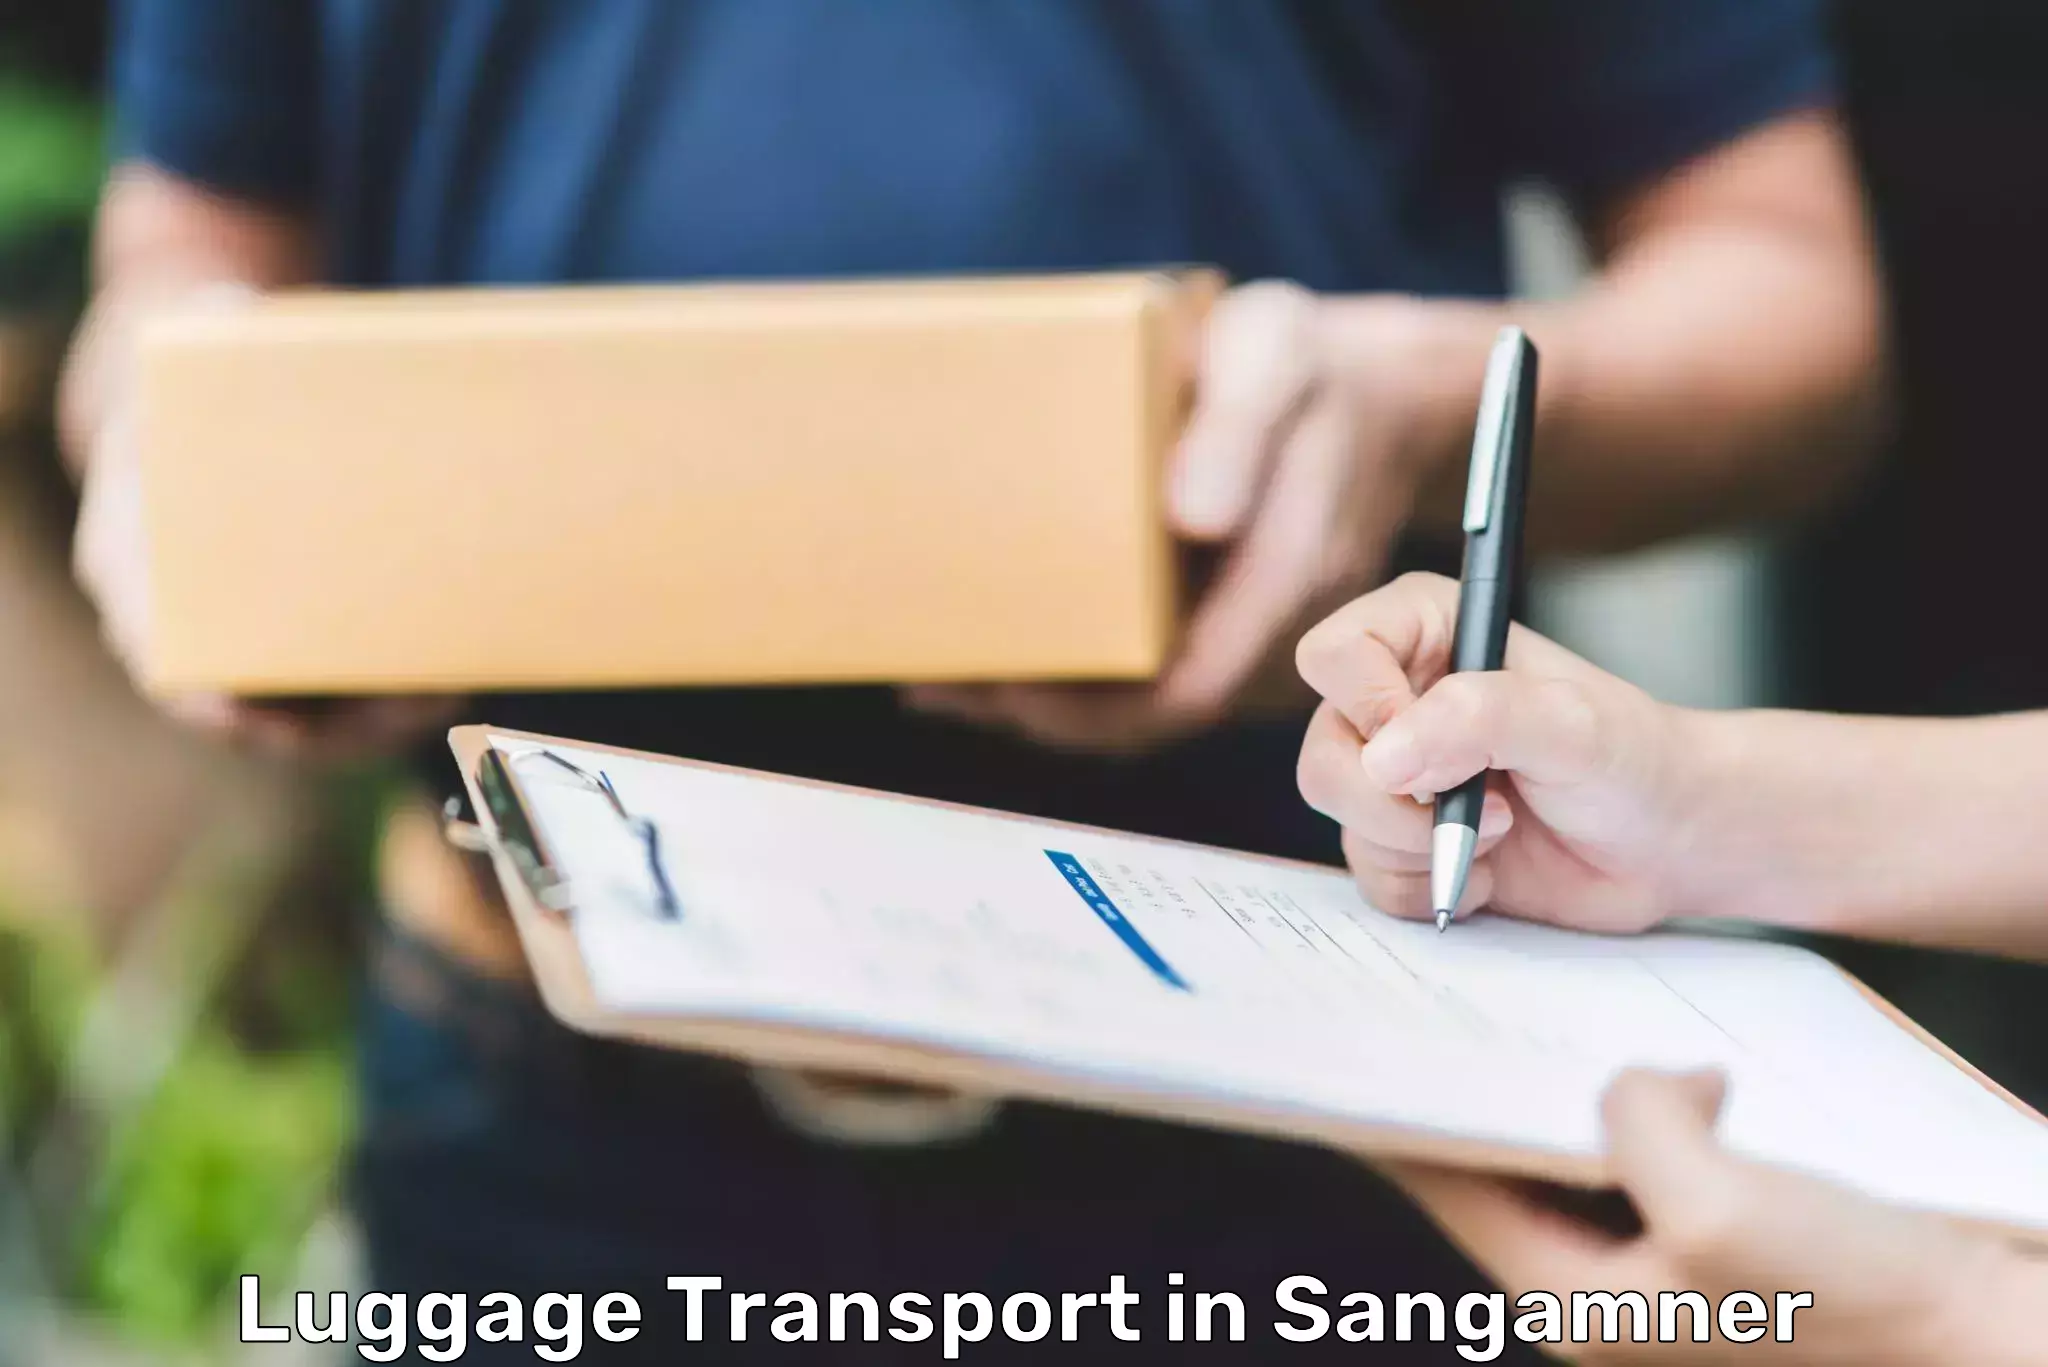 Luggage delivery system in Sangamner